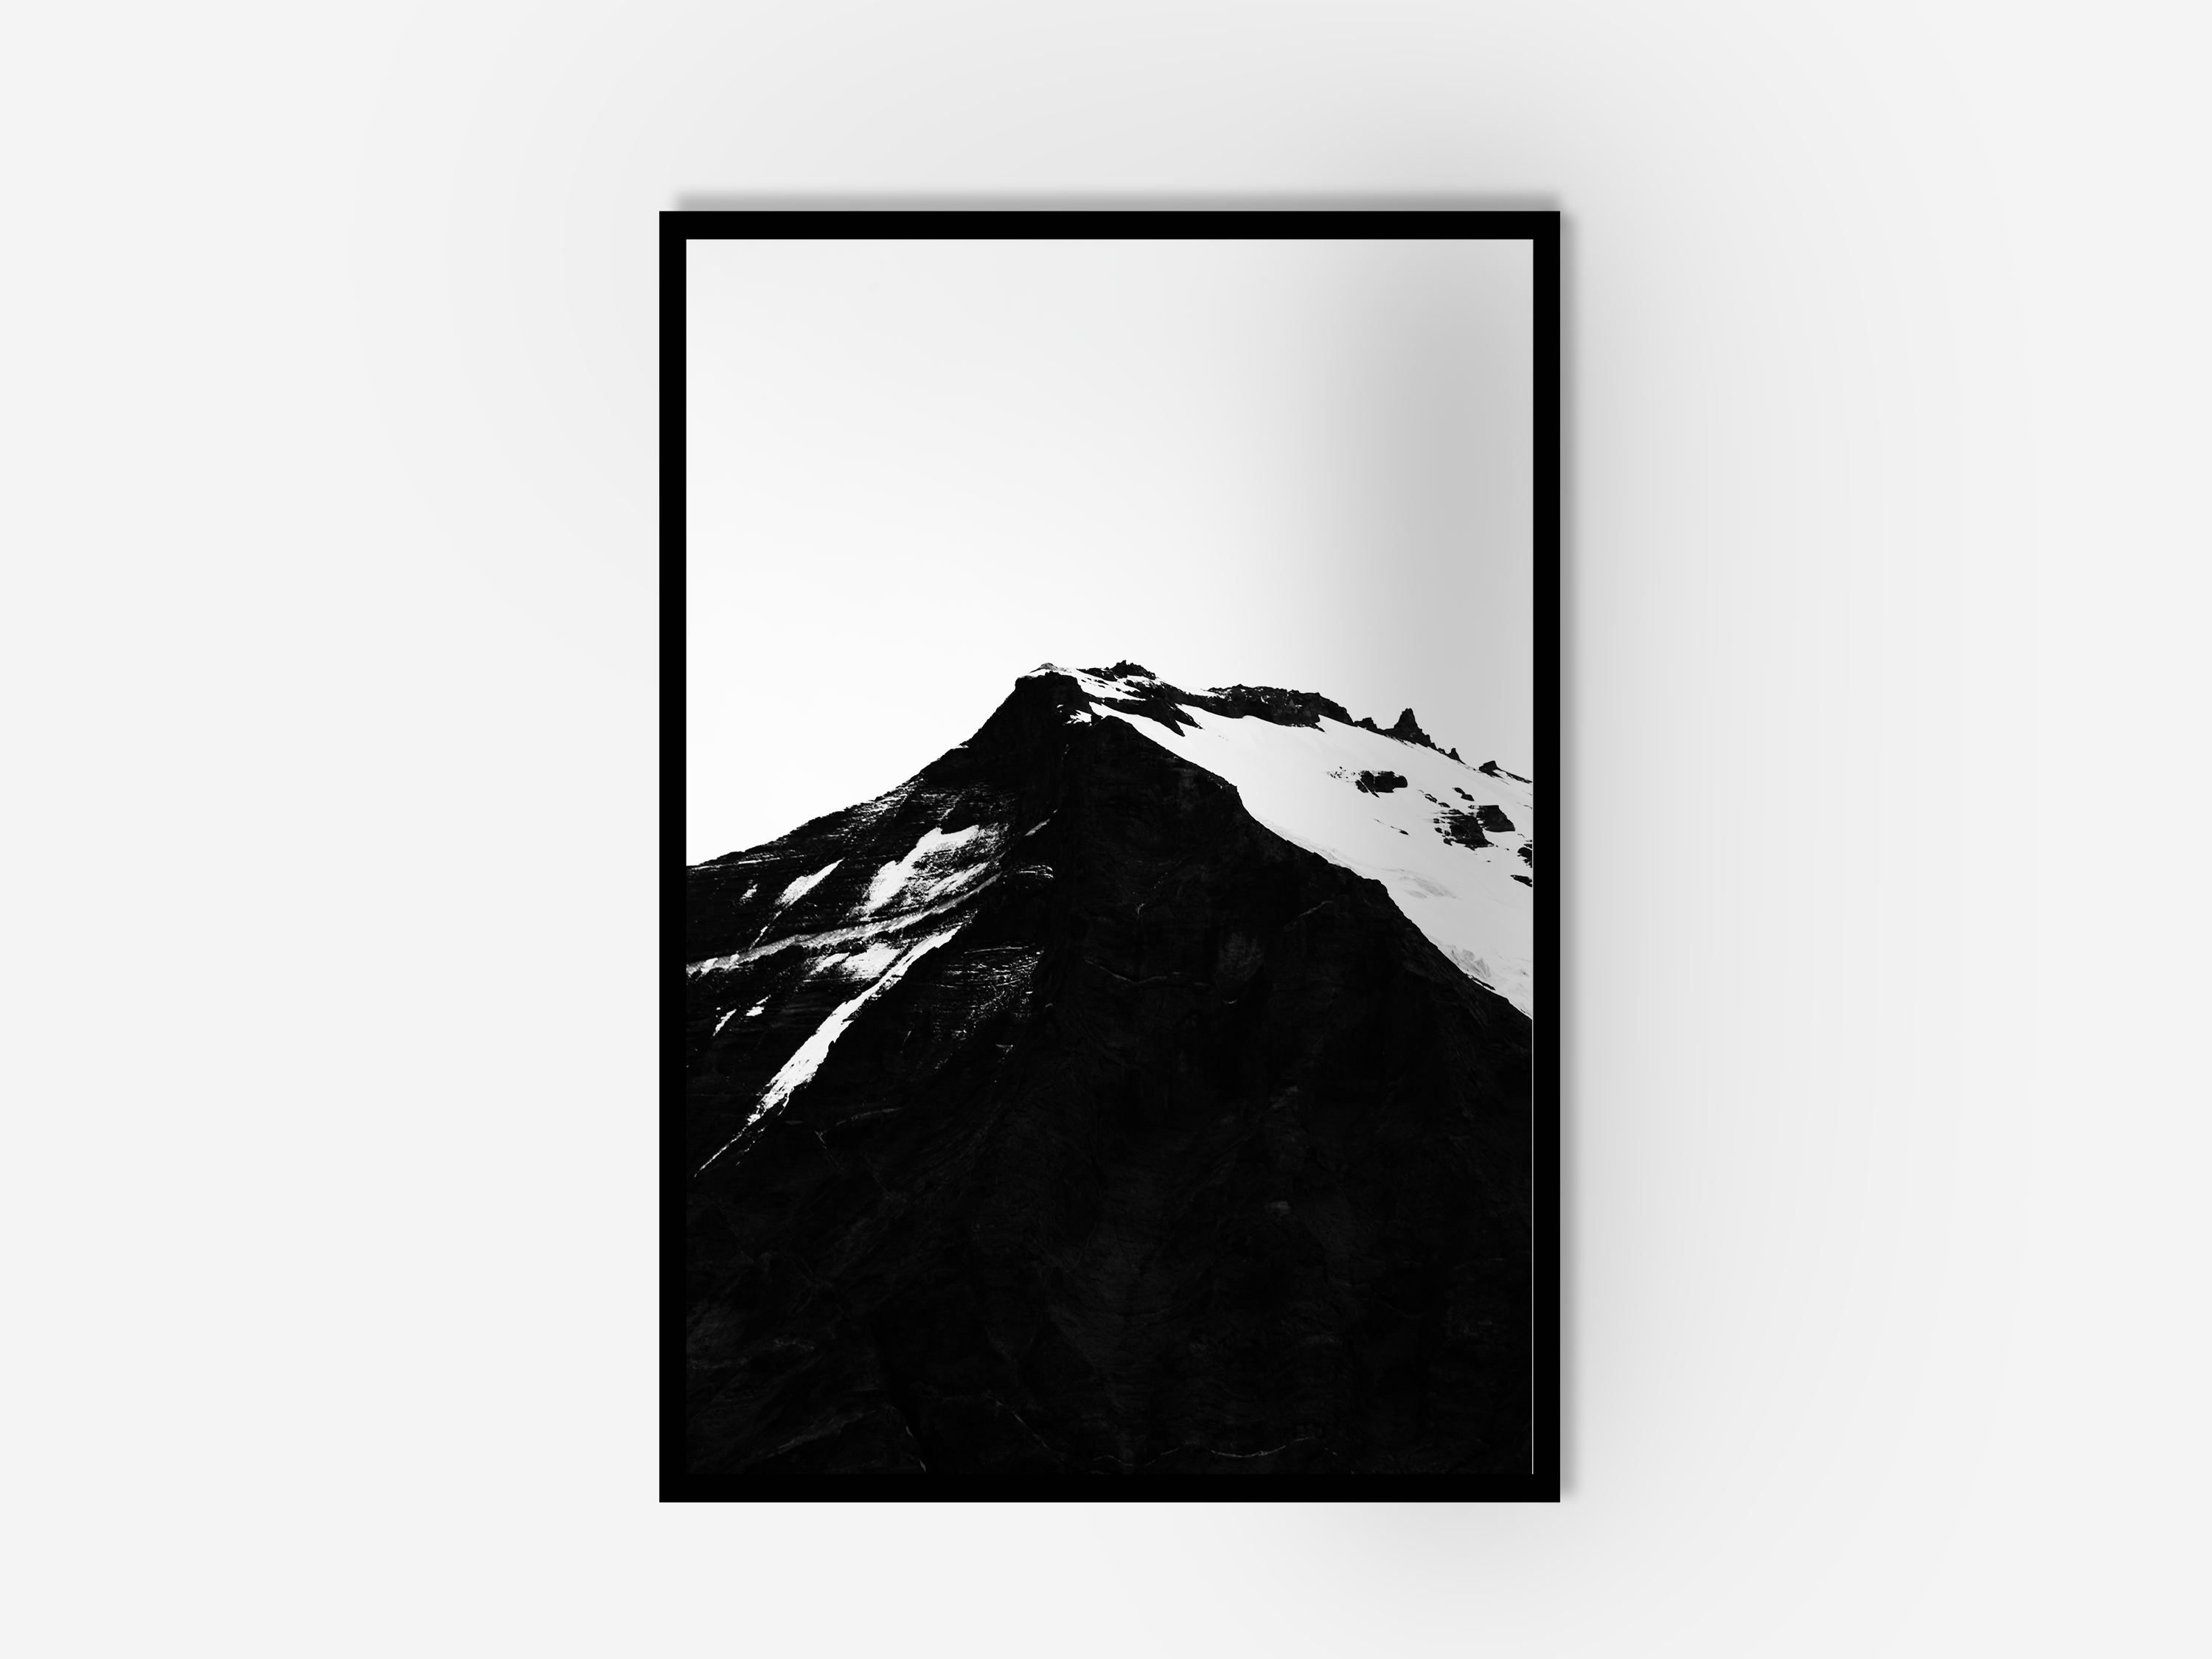 A framed black and white mountain photograph